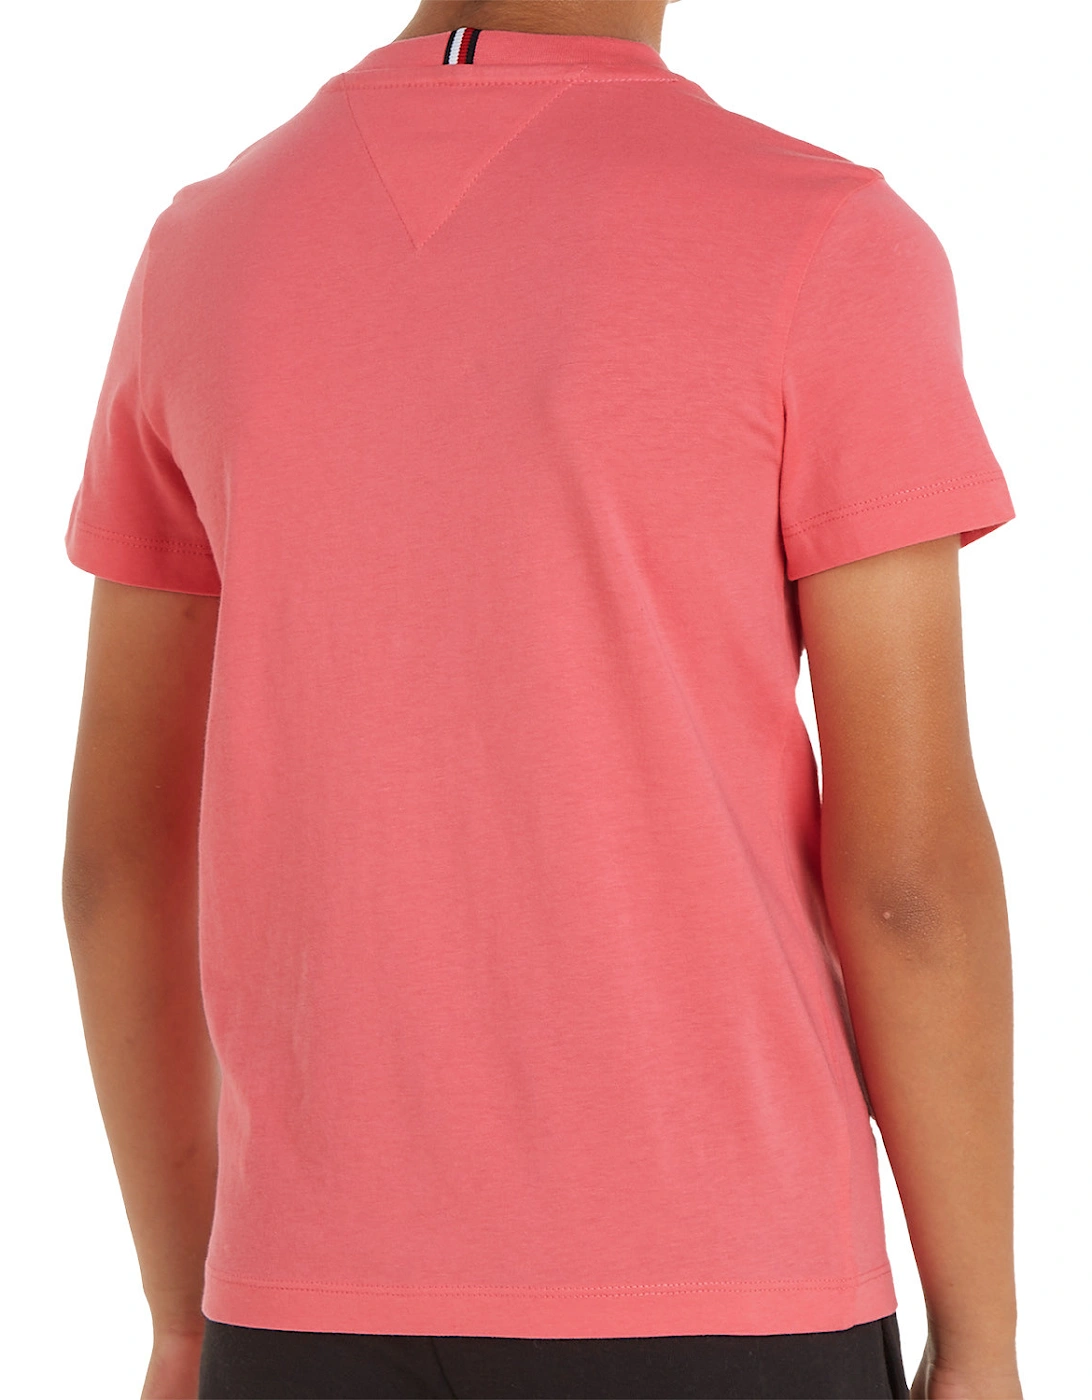 Youths Essential T-Shirt (Pink)